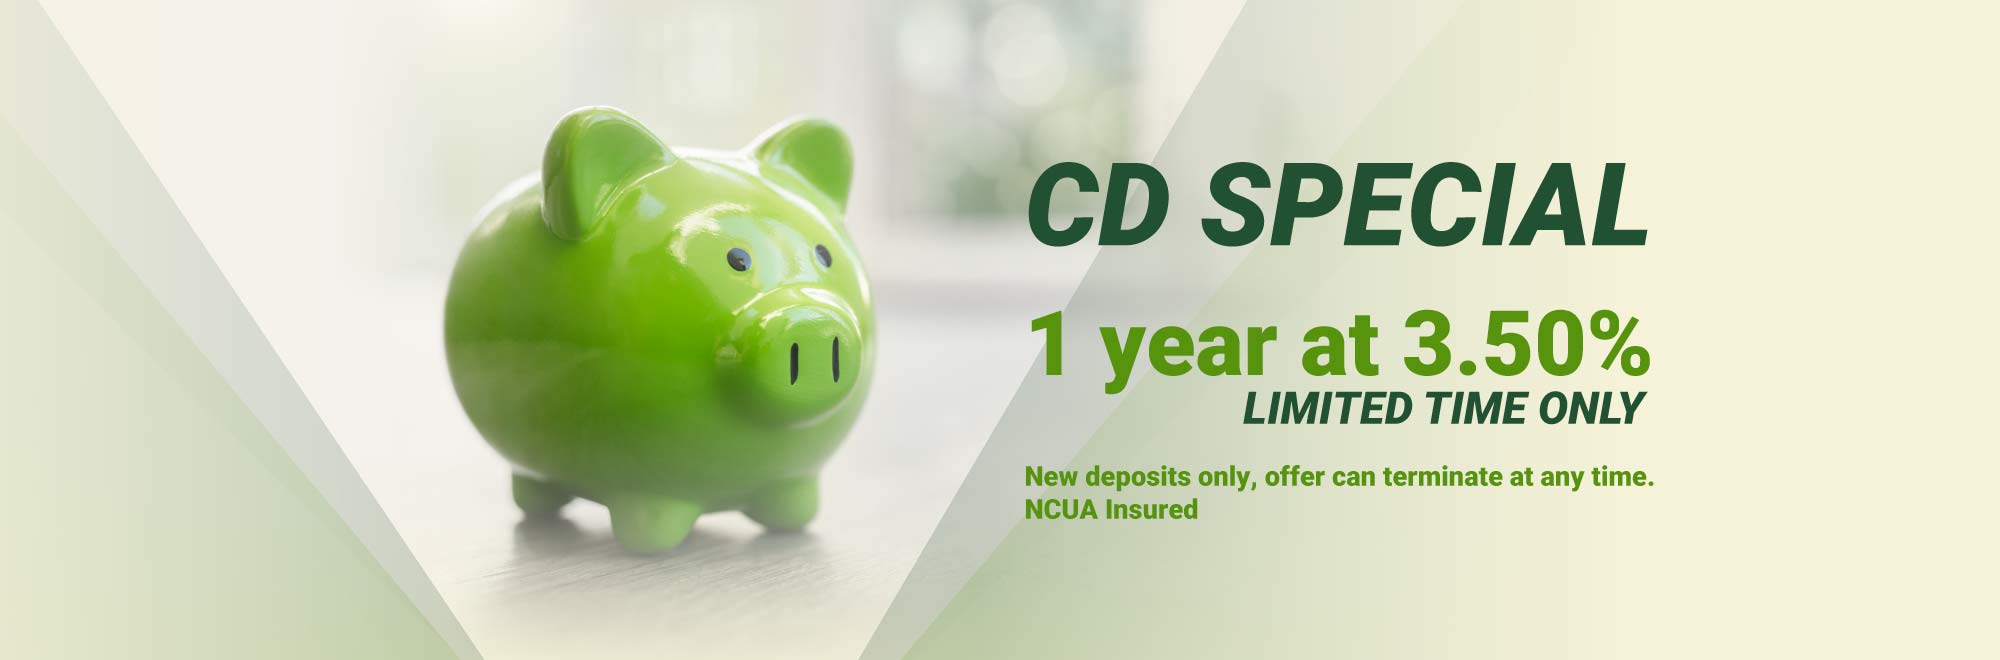 3% 1 year CD Special. Limited time only. New deposits only, offer can terminate at any time. NCUA insured.